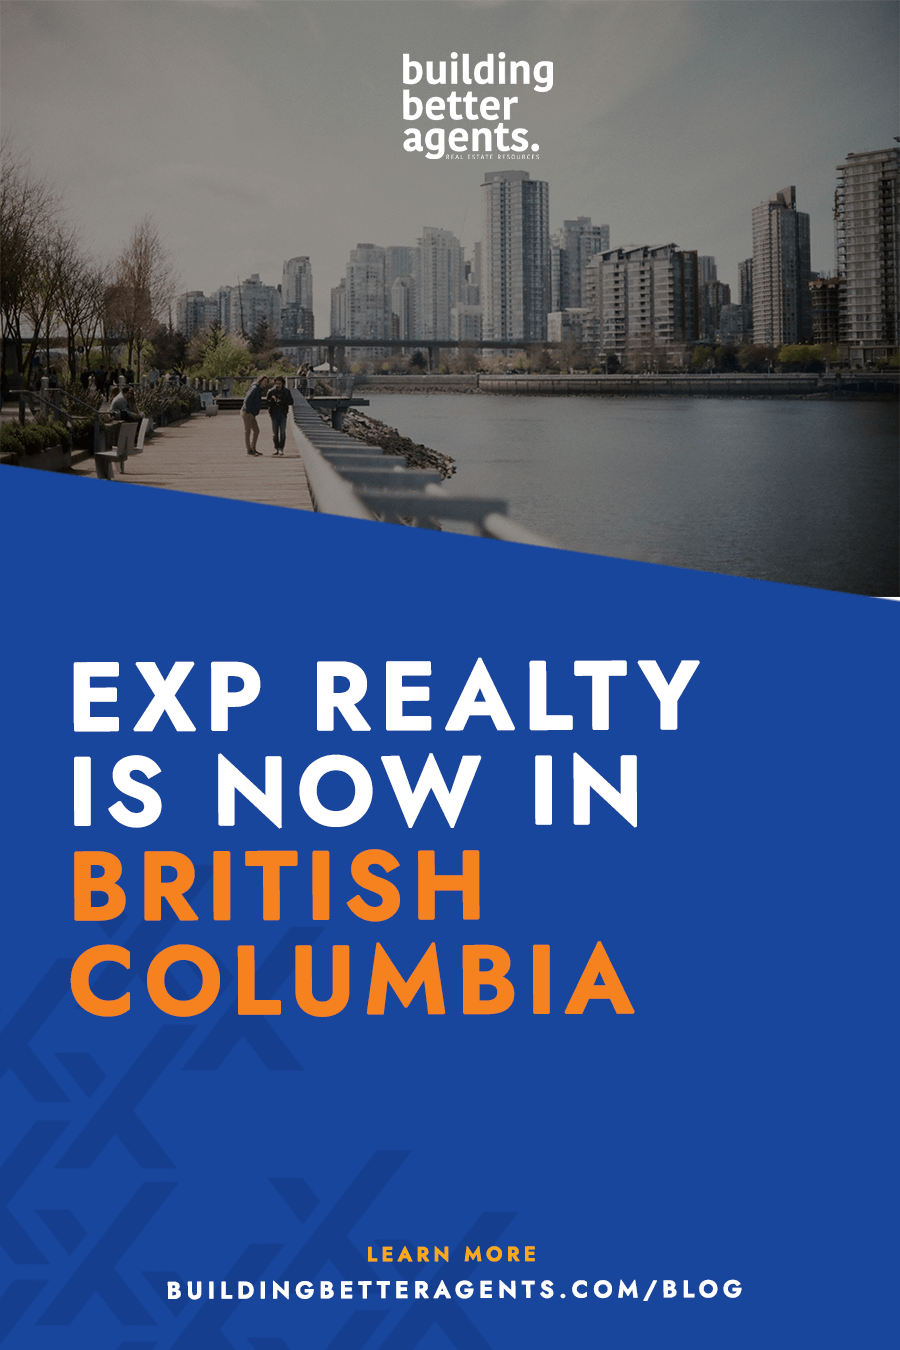 eXp Realty Canada now operates in three Canadian provinces as well as 49 states in the US.